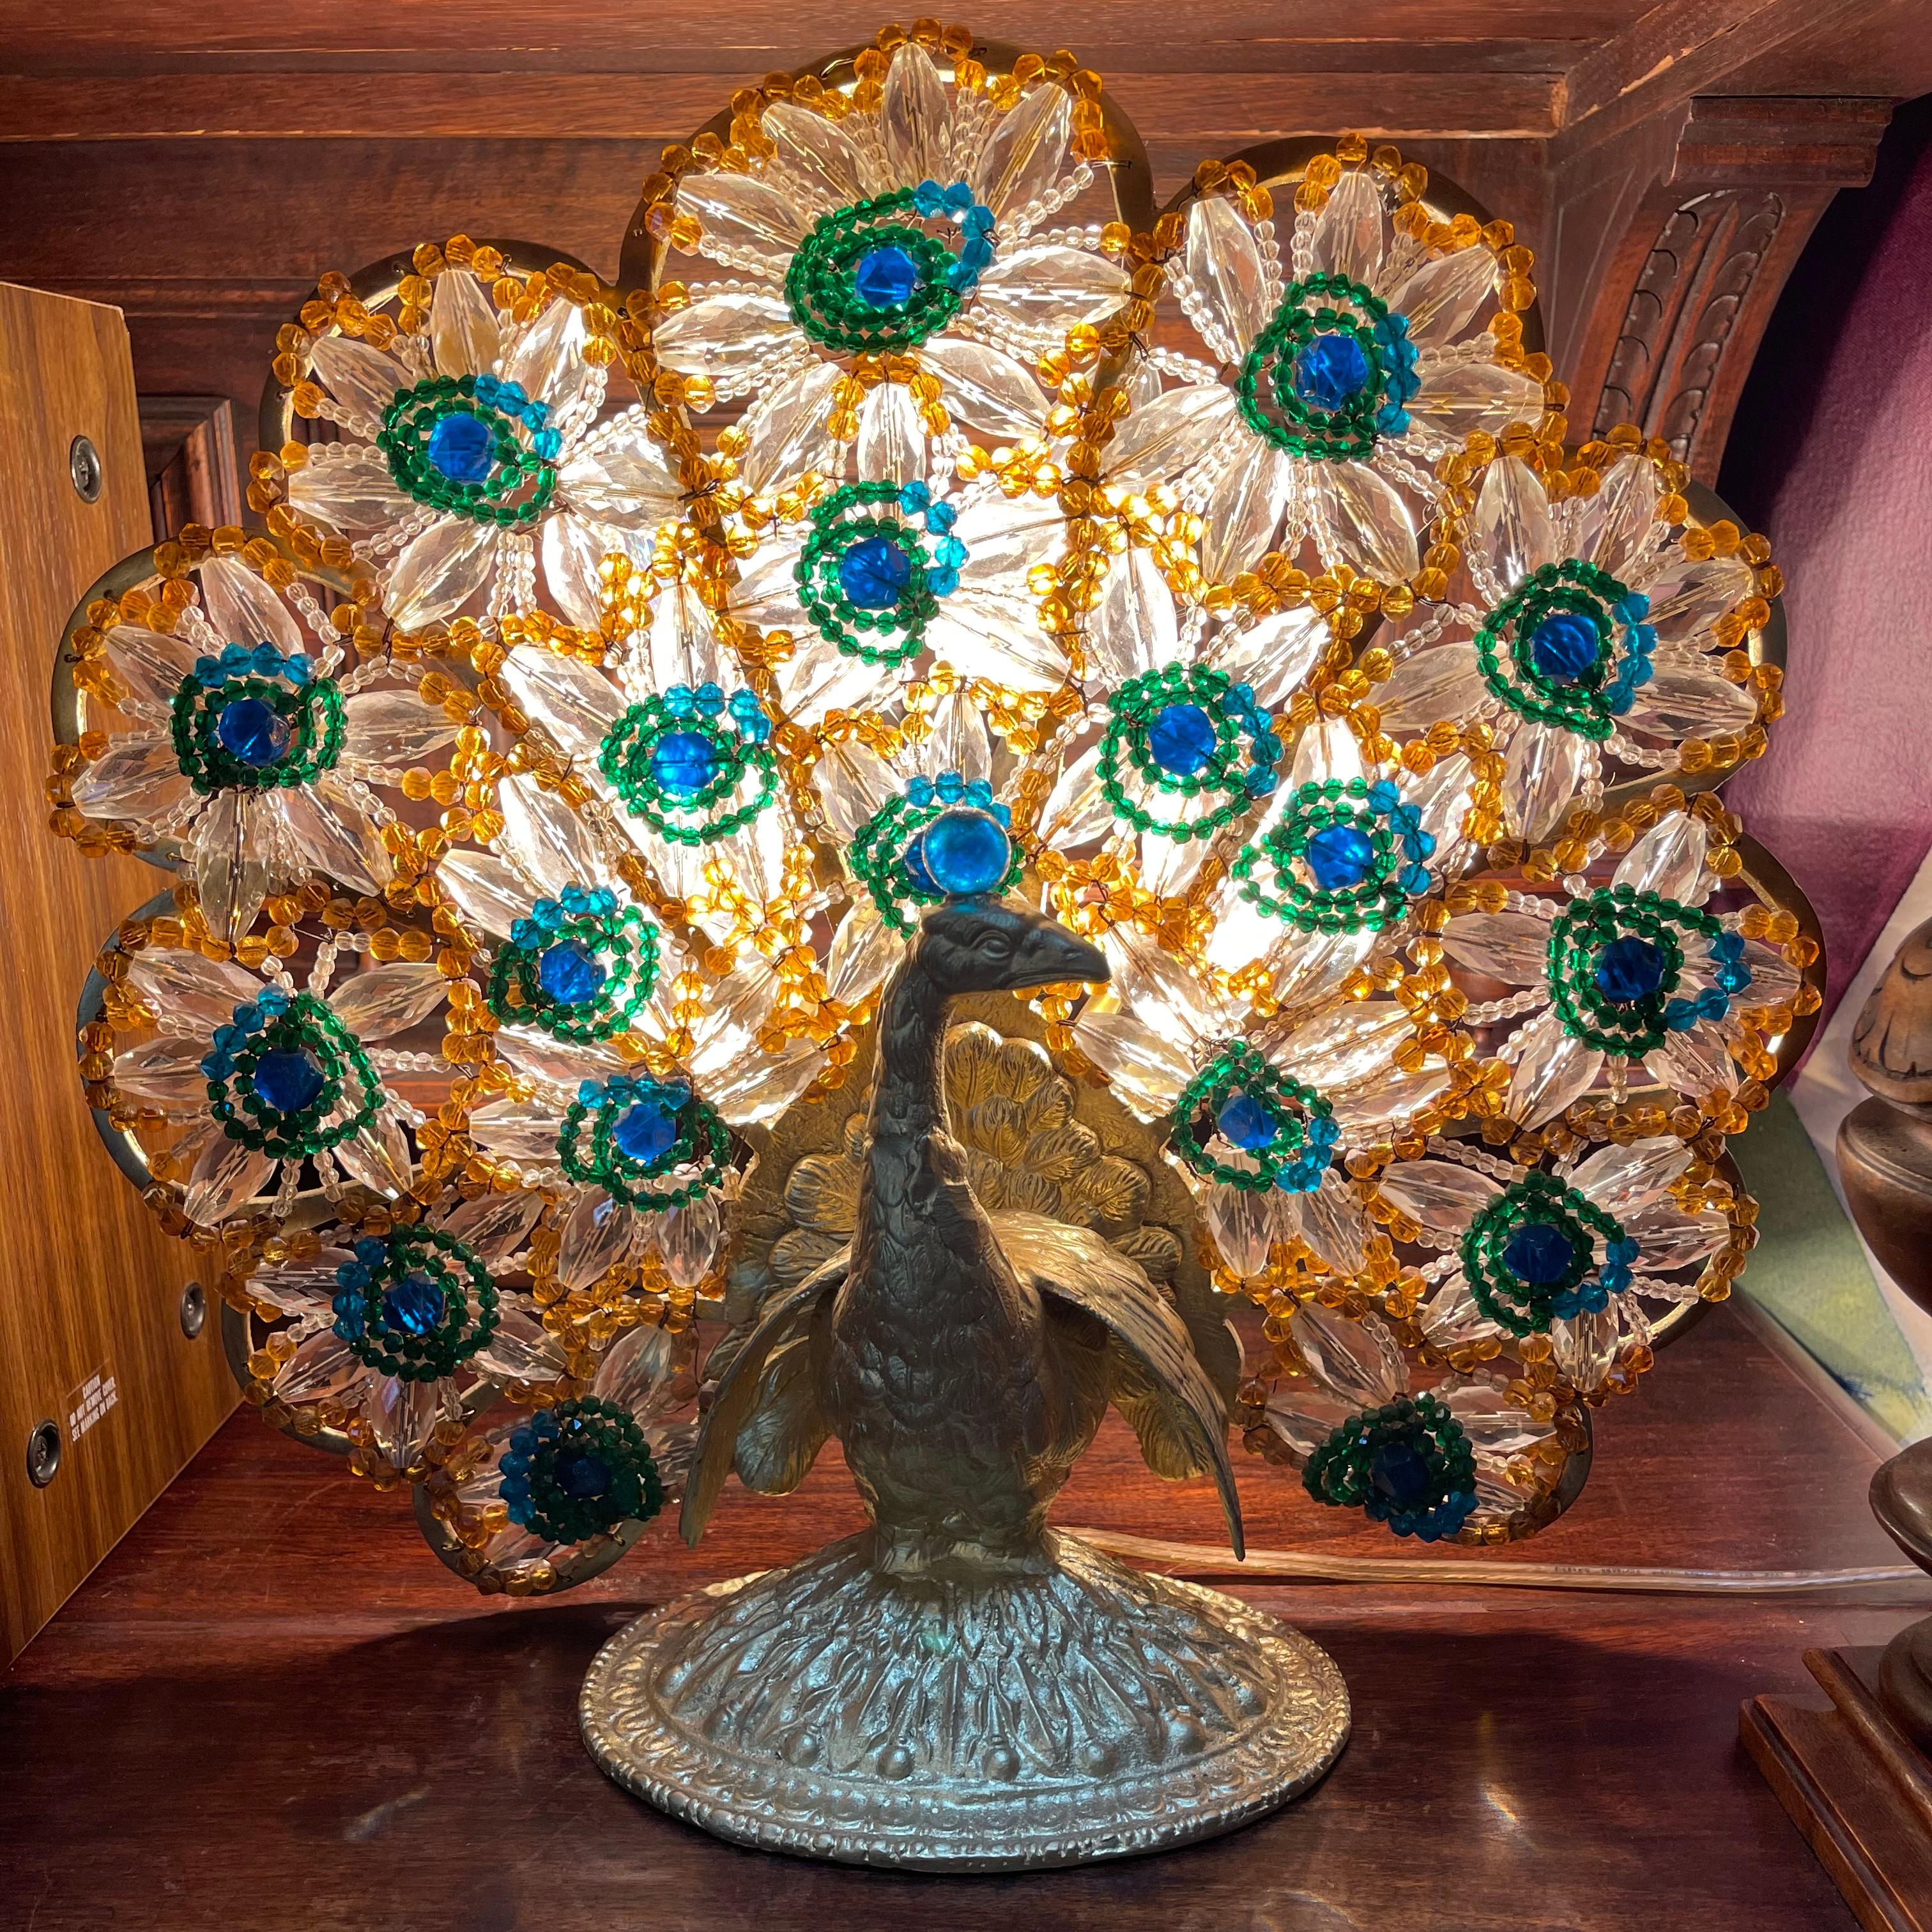 Antique Hollywood Regency Bohemian beaded and gilt bronze peacock lamp.

This bohemian beaded and gilt bronze peacock lamp has a foliate cast base. The tail feathers are made from beaded glass in clear, amber, emerald green, and cobalt